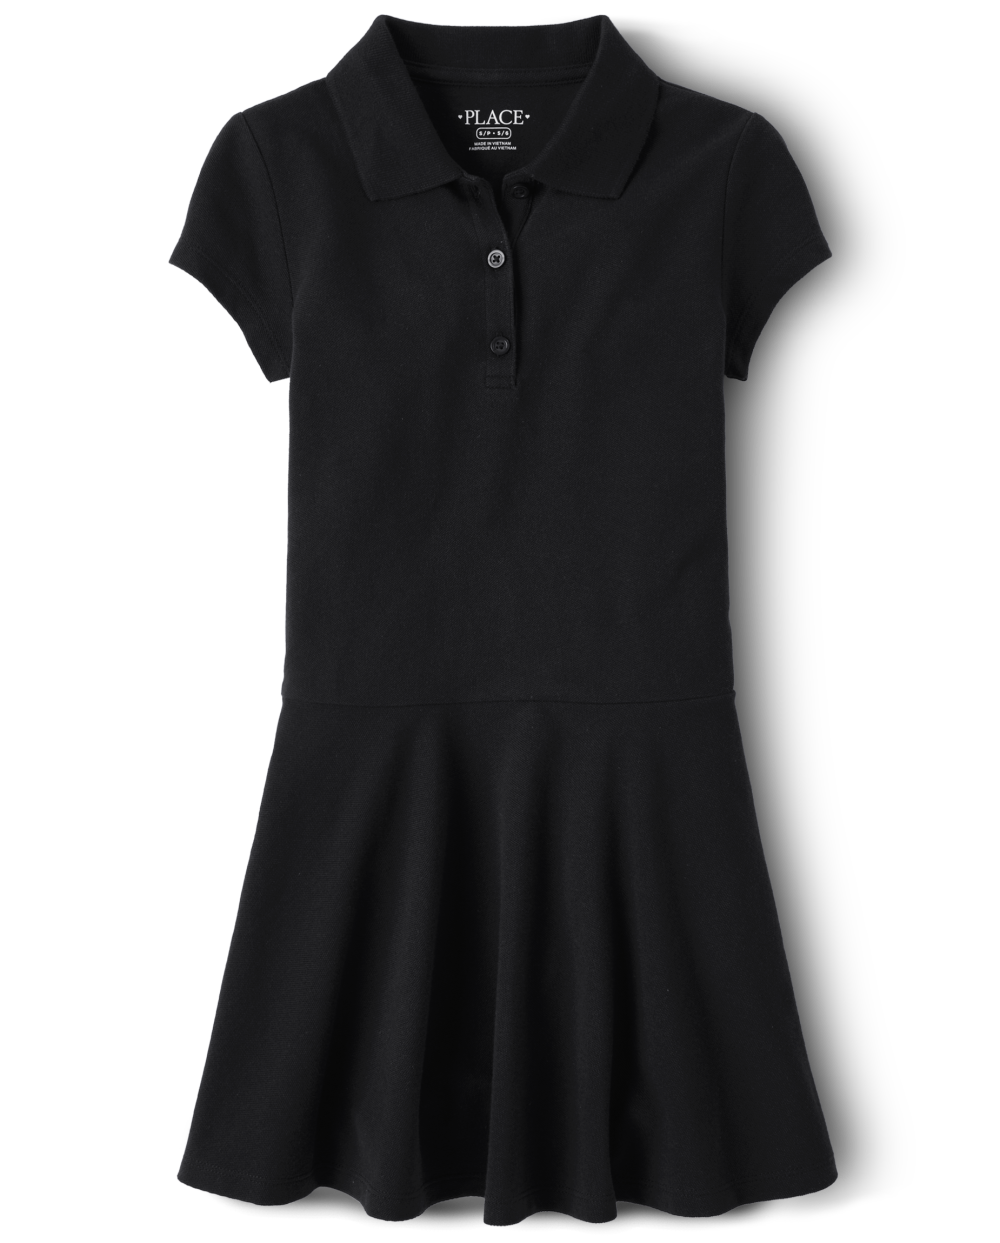 Girls Short Sleeves Sleeves Collared Above the Knee Dress